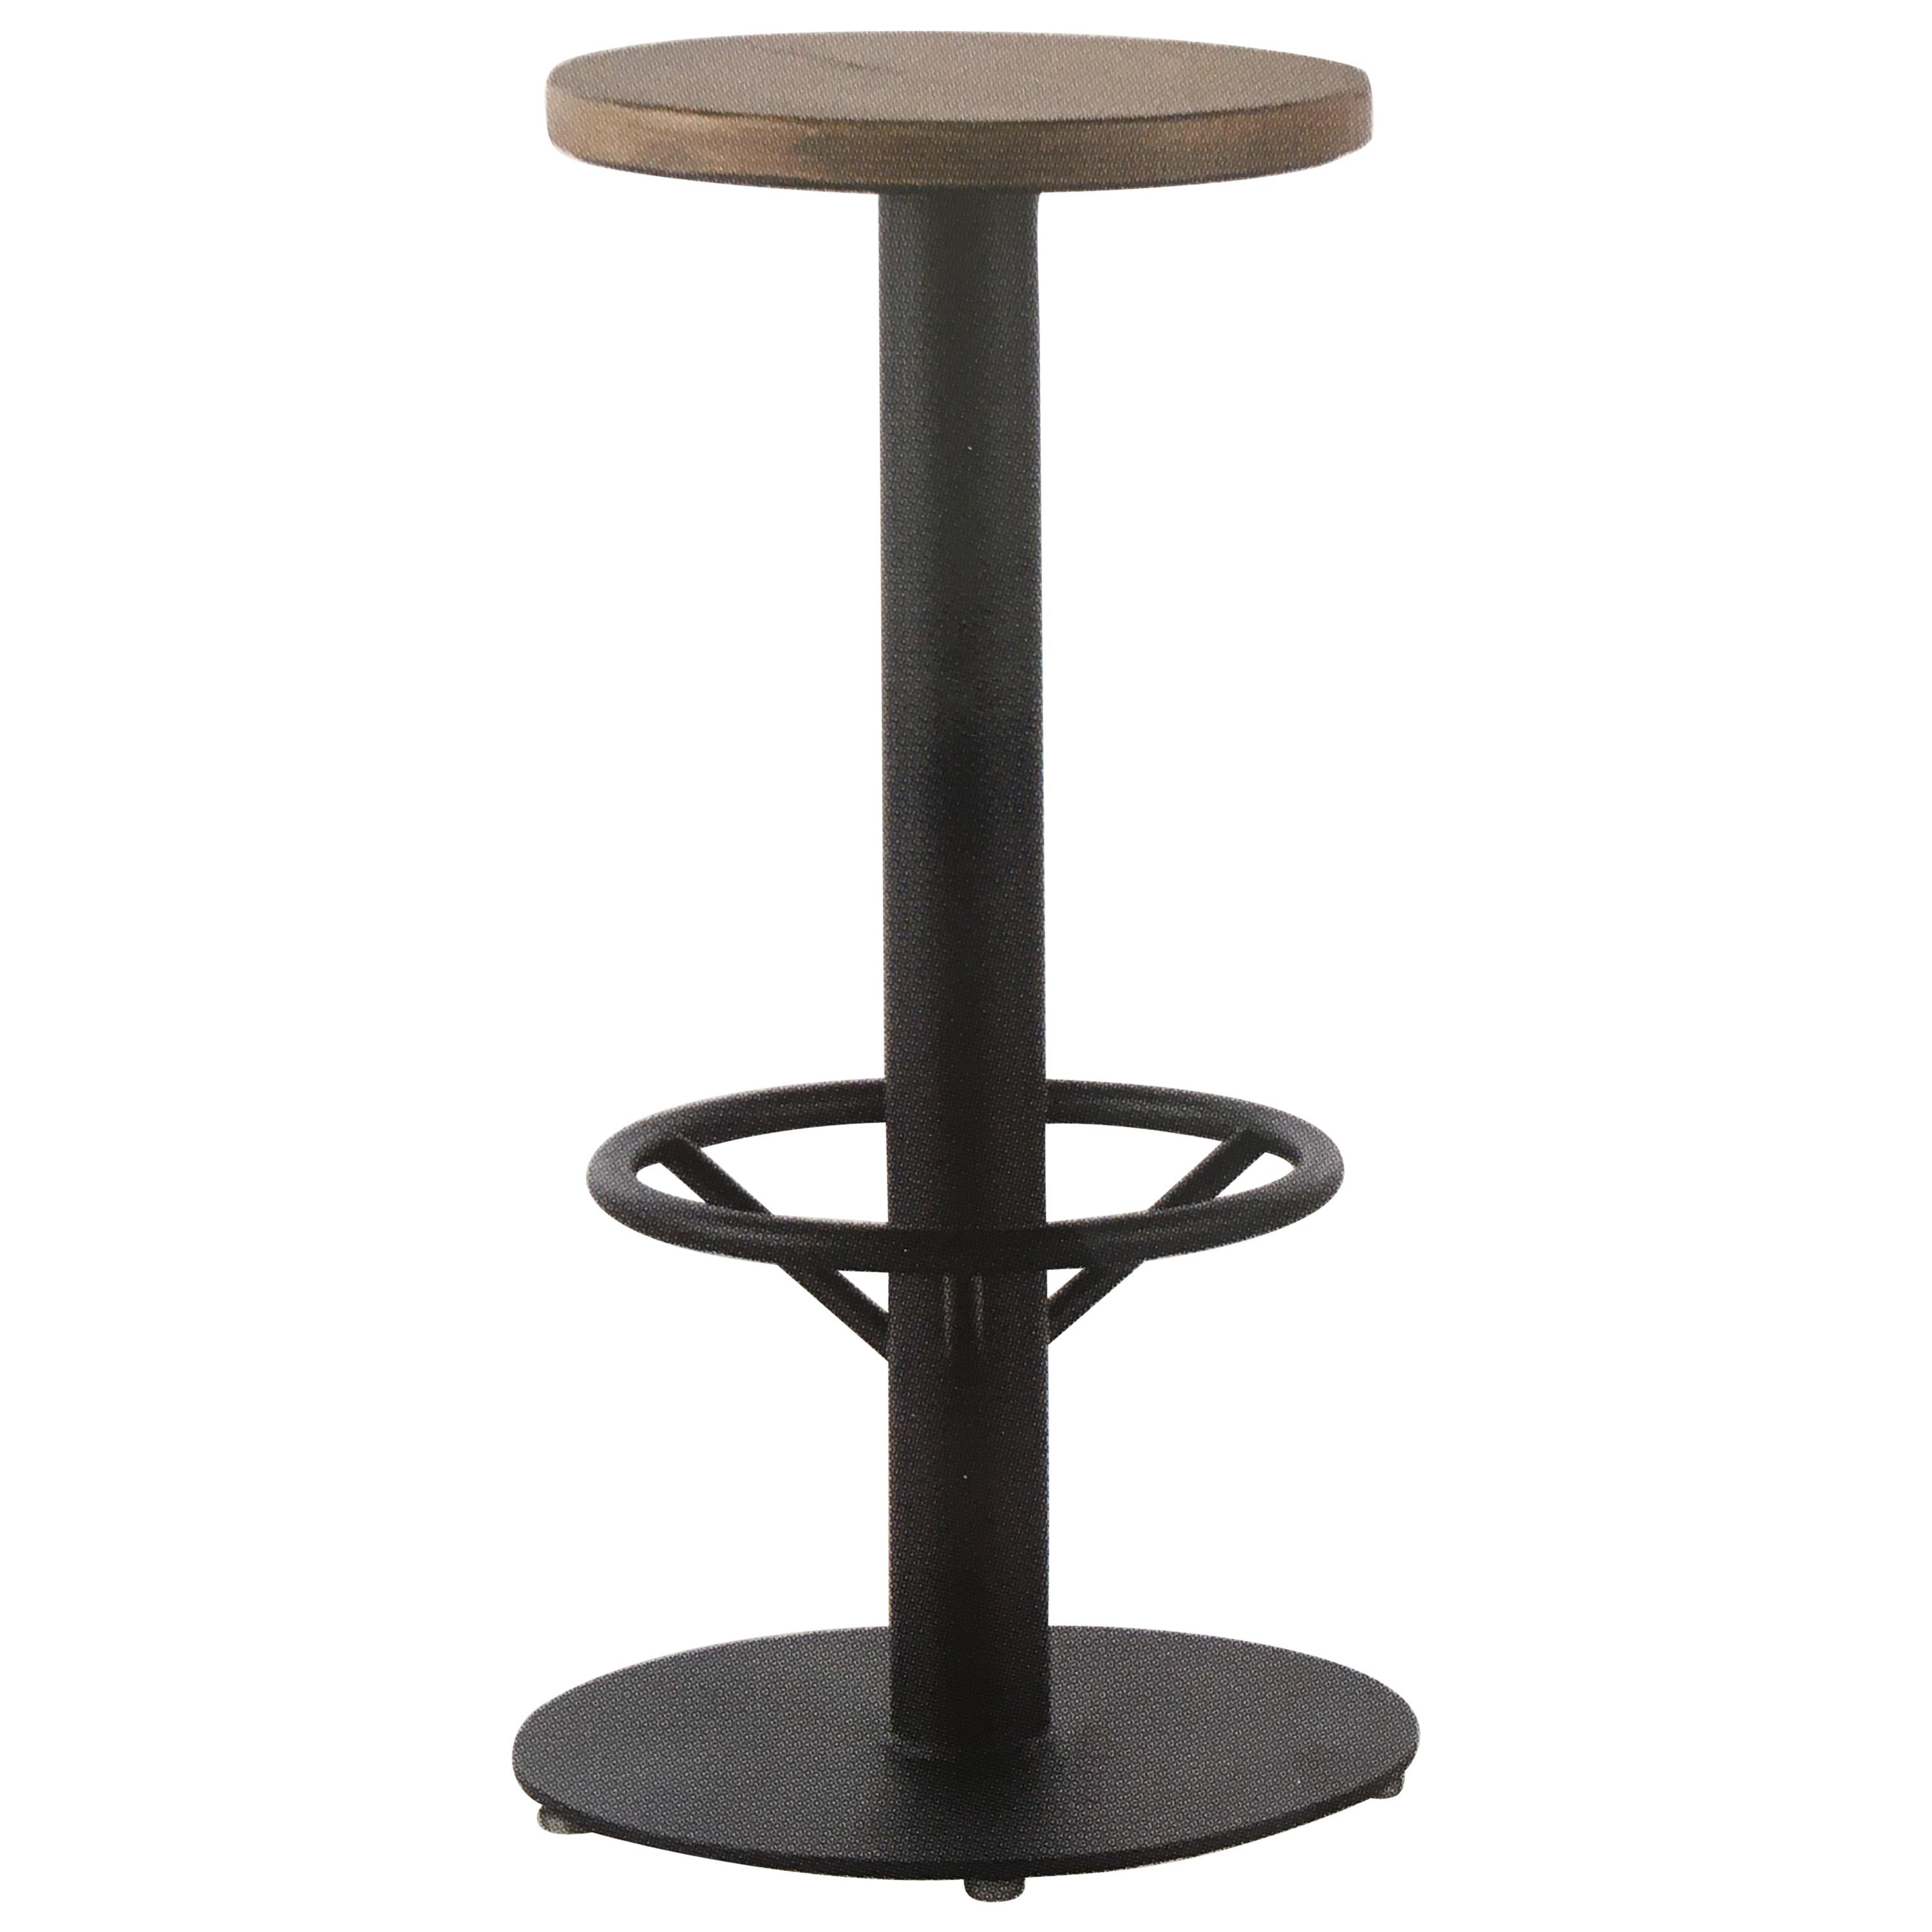 New Industrial Wrought Iron Shop Stool with Oak Seat For Sale